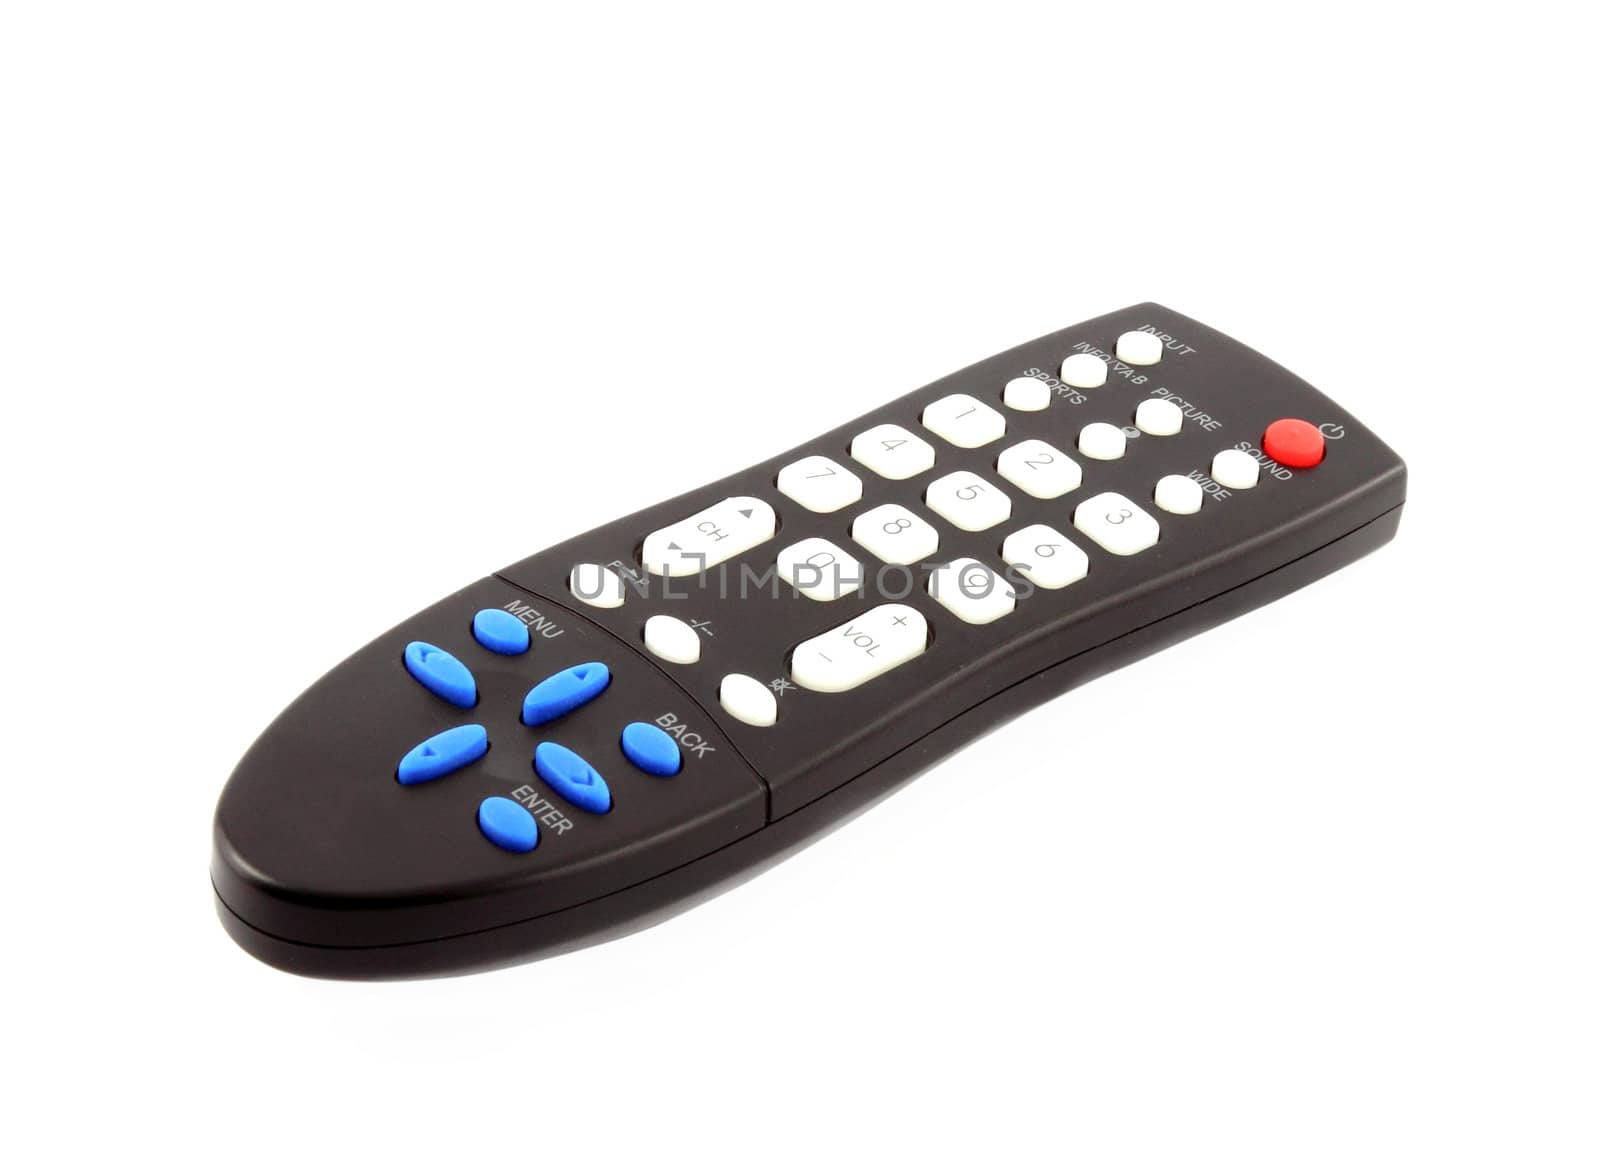 black TV remote control isolated on white background by geargodz